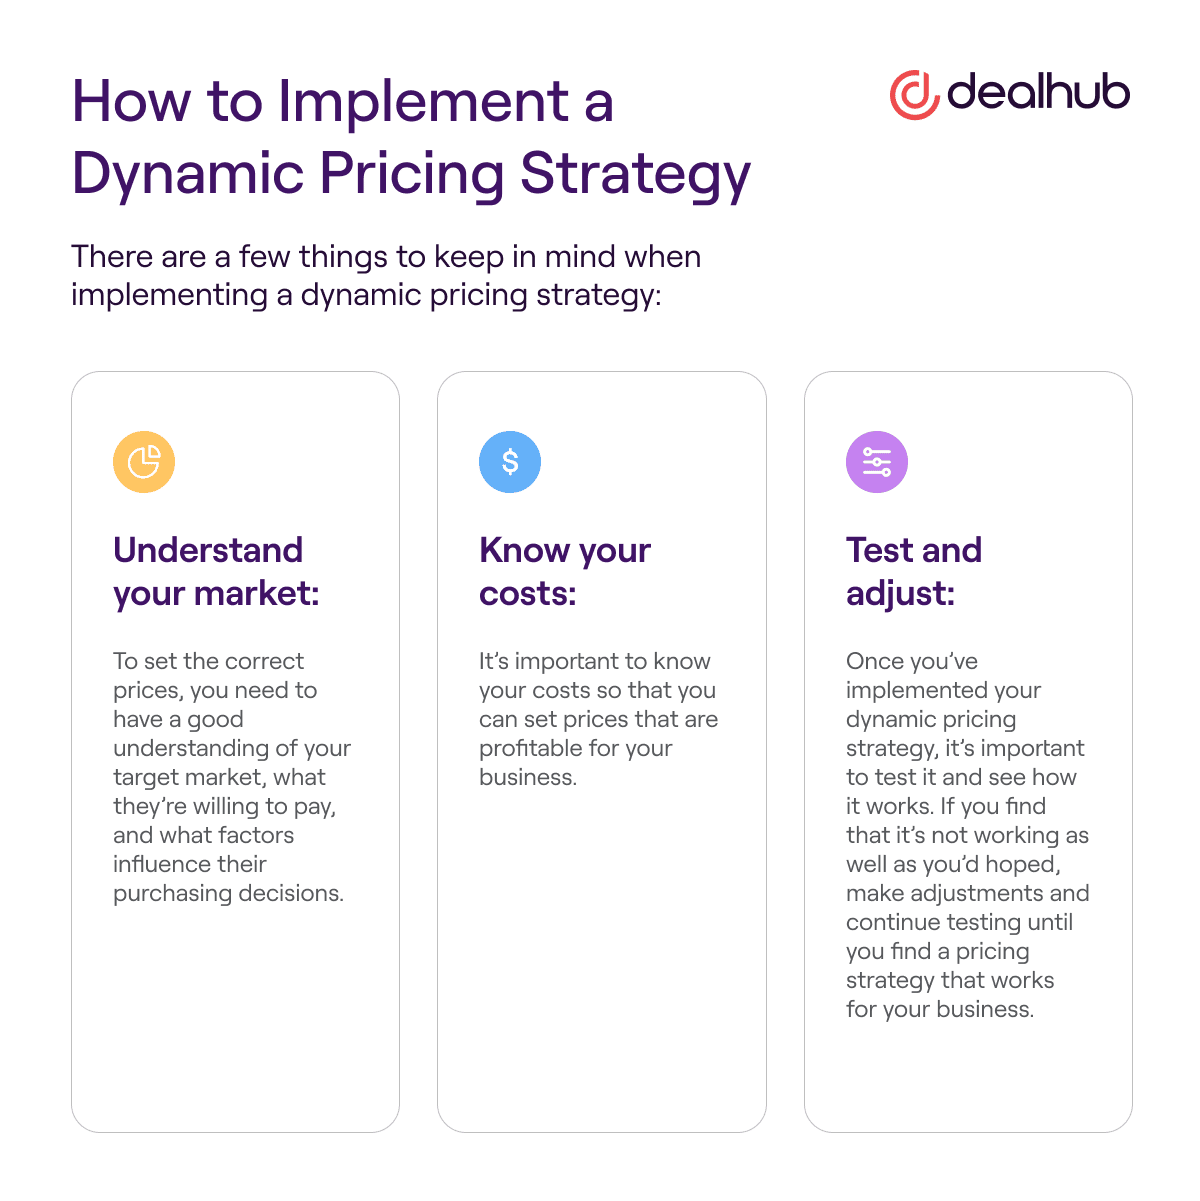 How to Implement a Dynamic Pricing Strategy